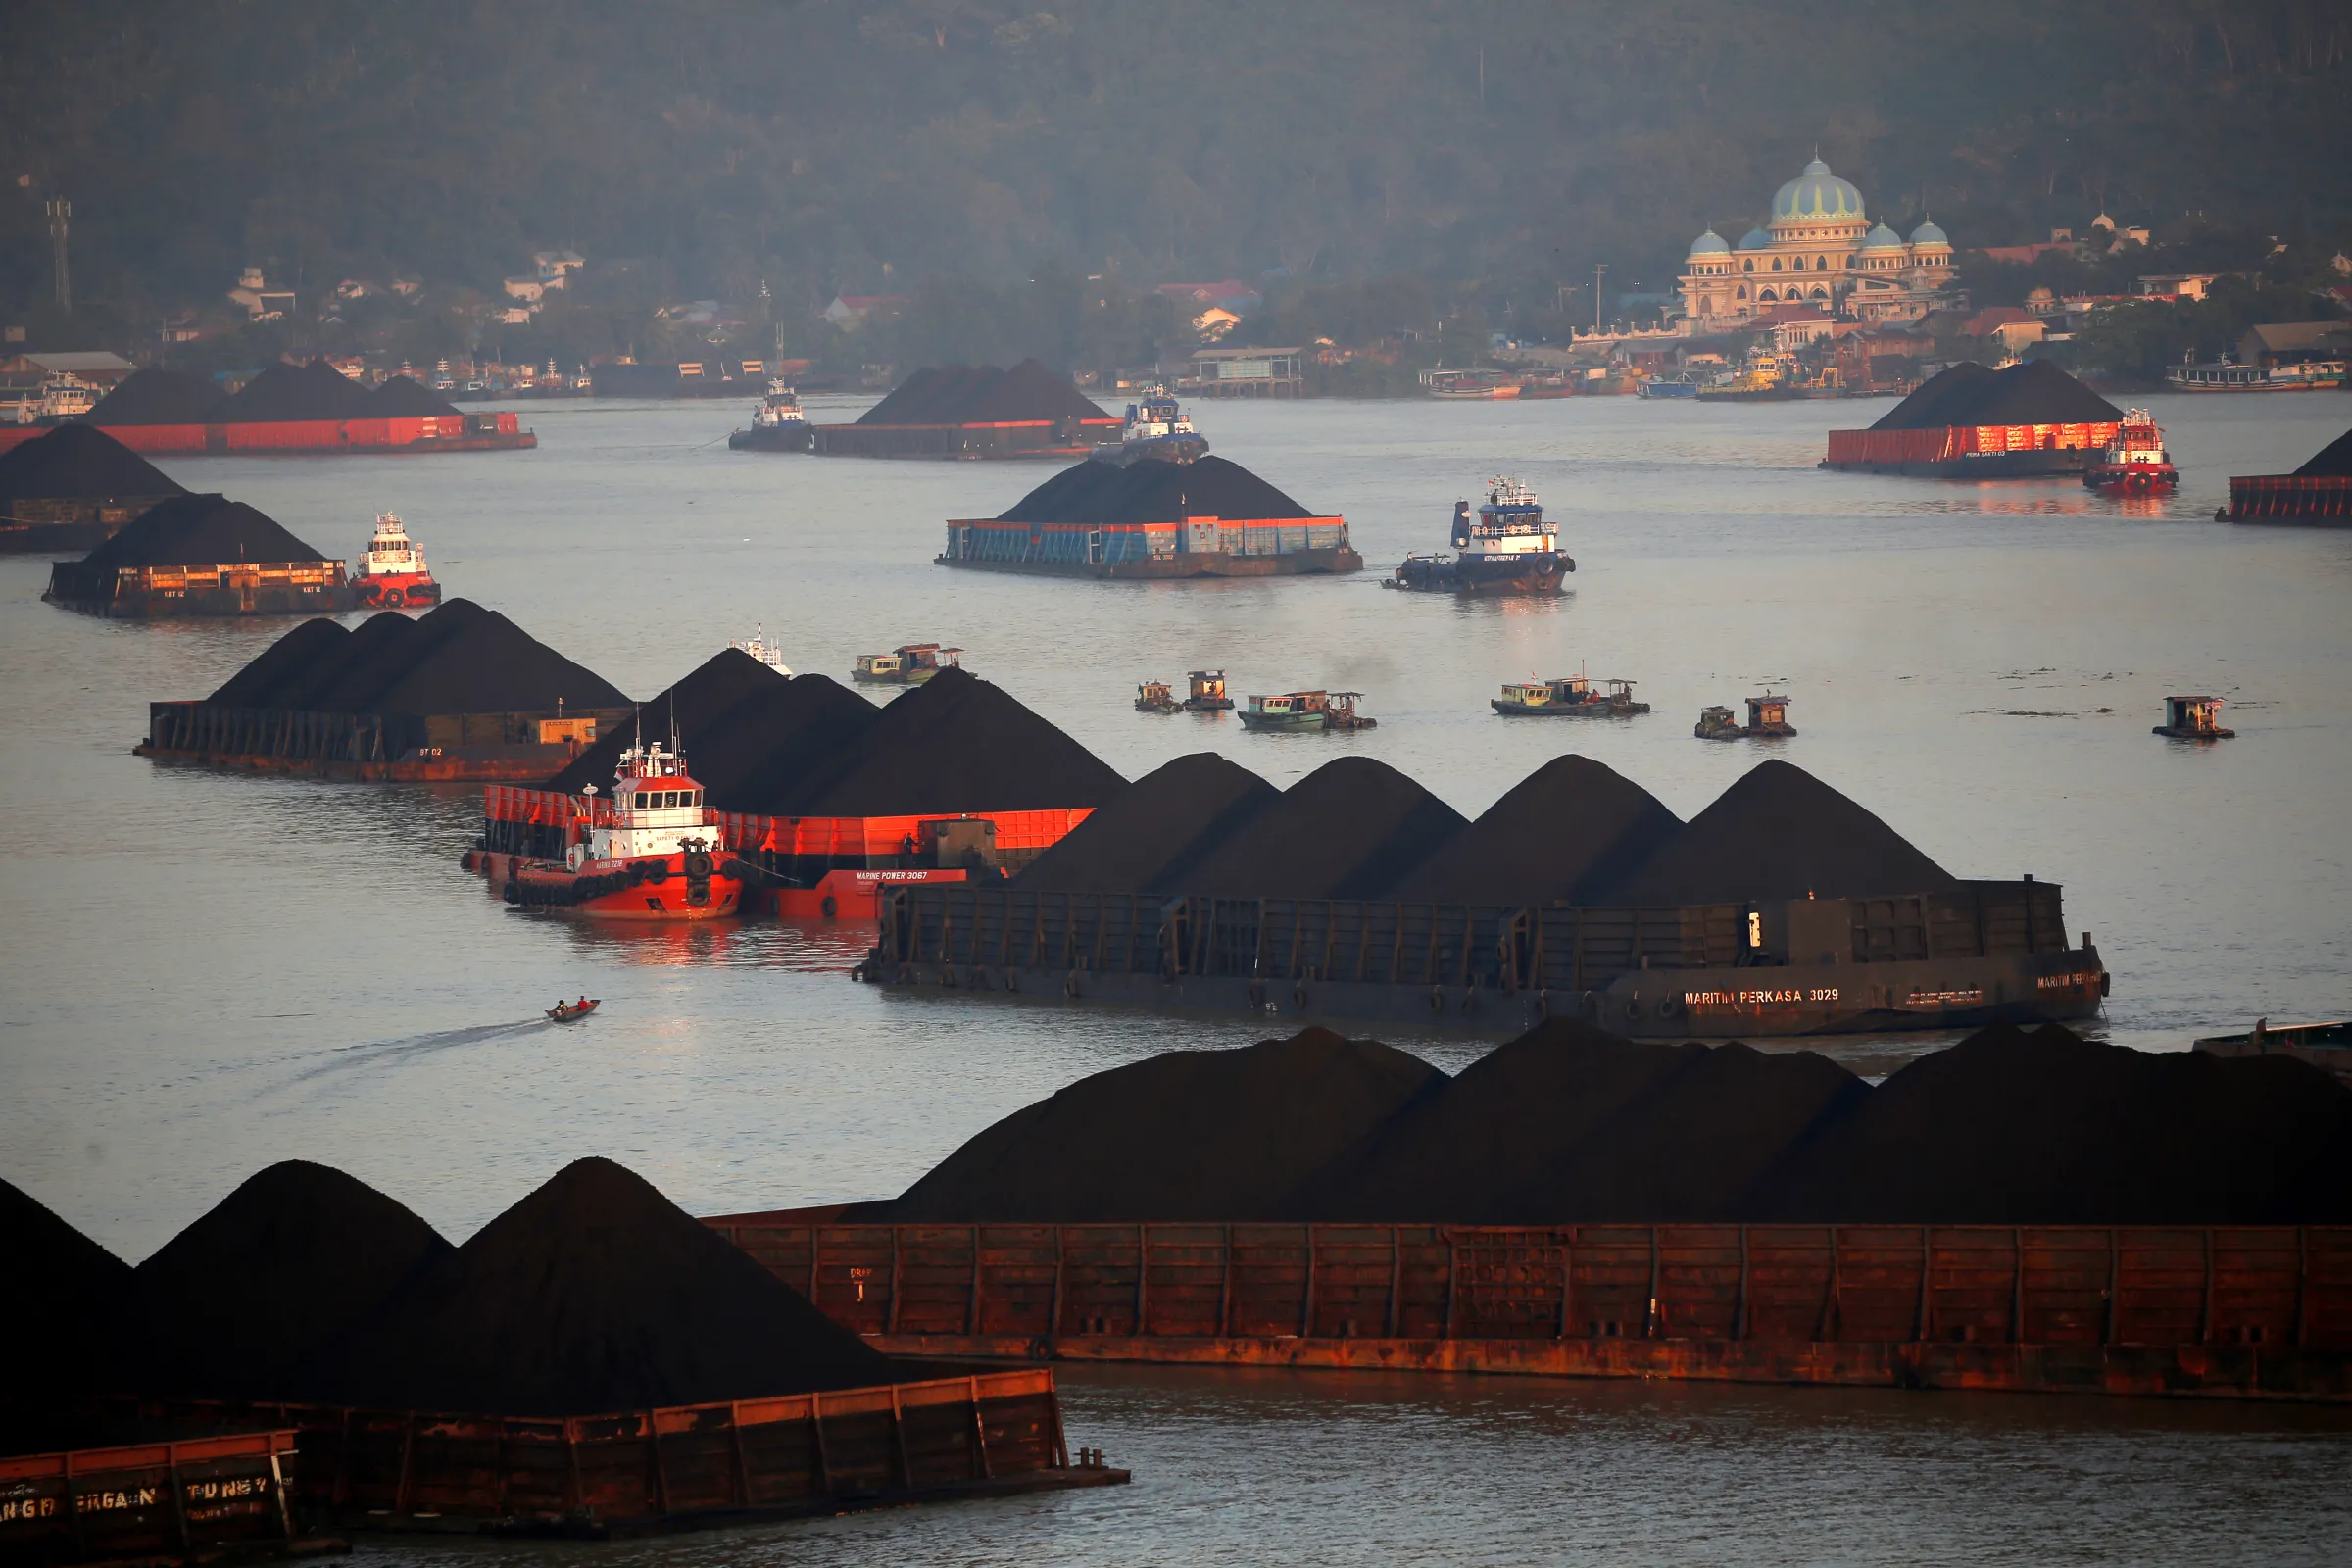 Coal barges are pictured as they queue to be pull along Mahakam river in Samarinda, East Kalimantan province, Indonesia, August 31, 2019